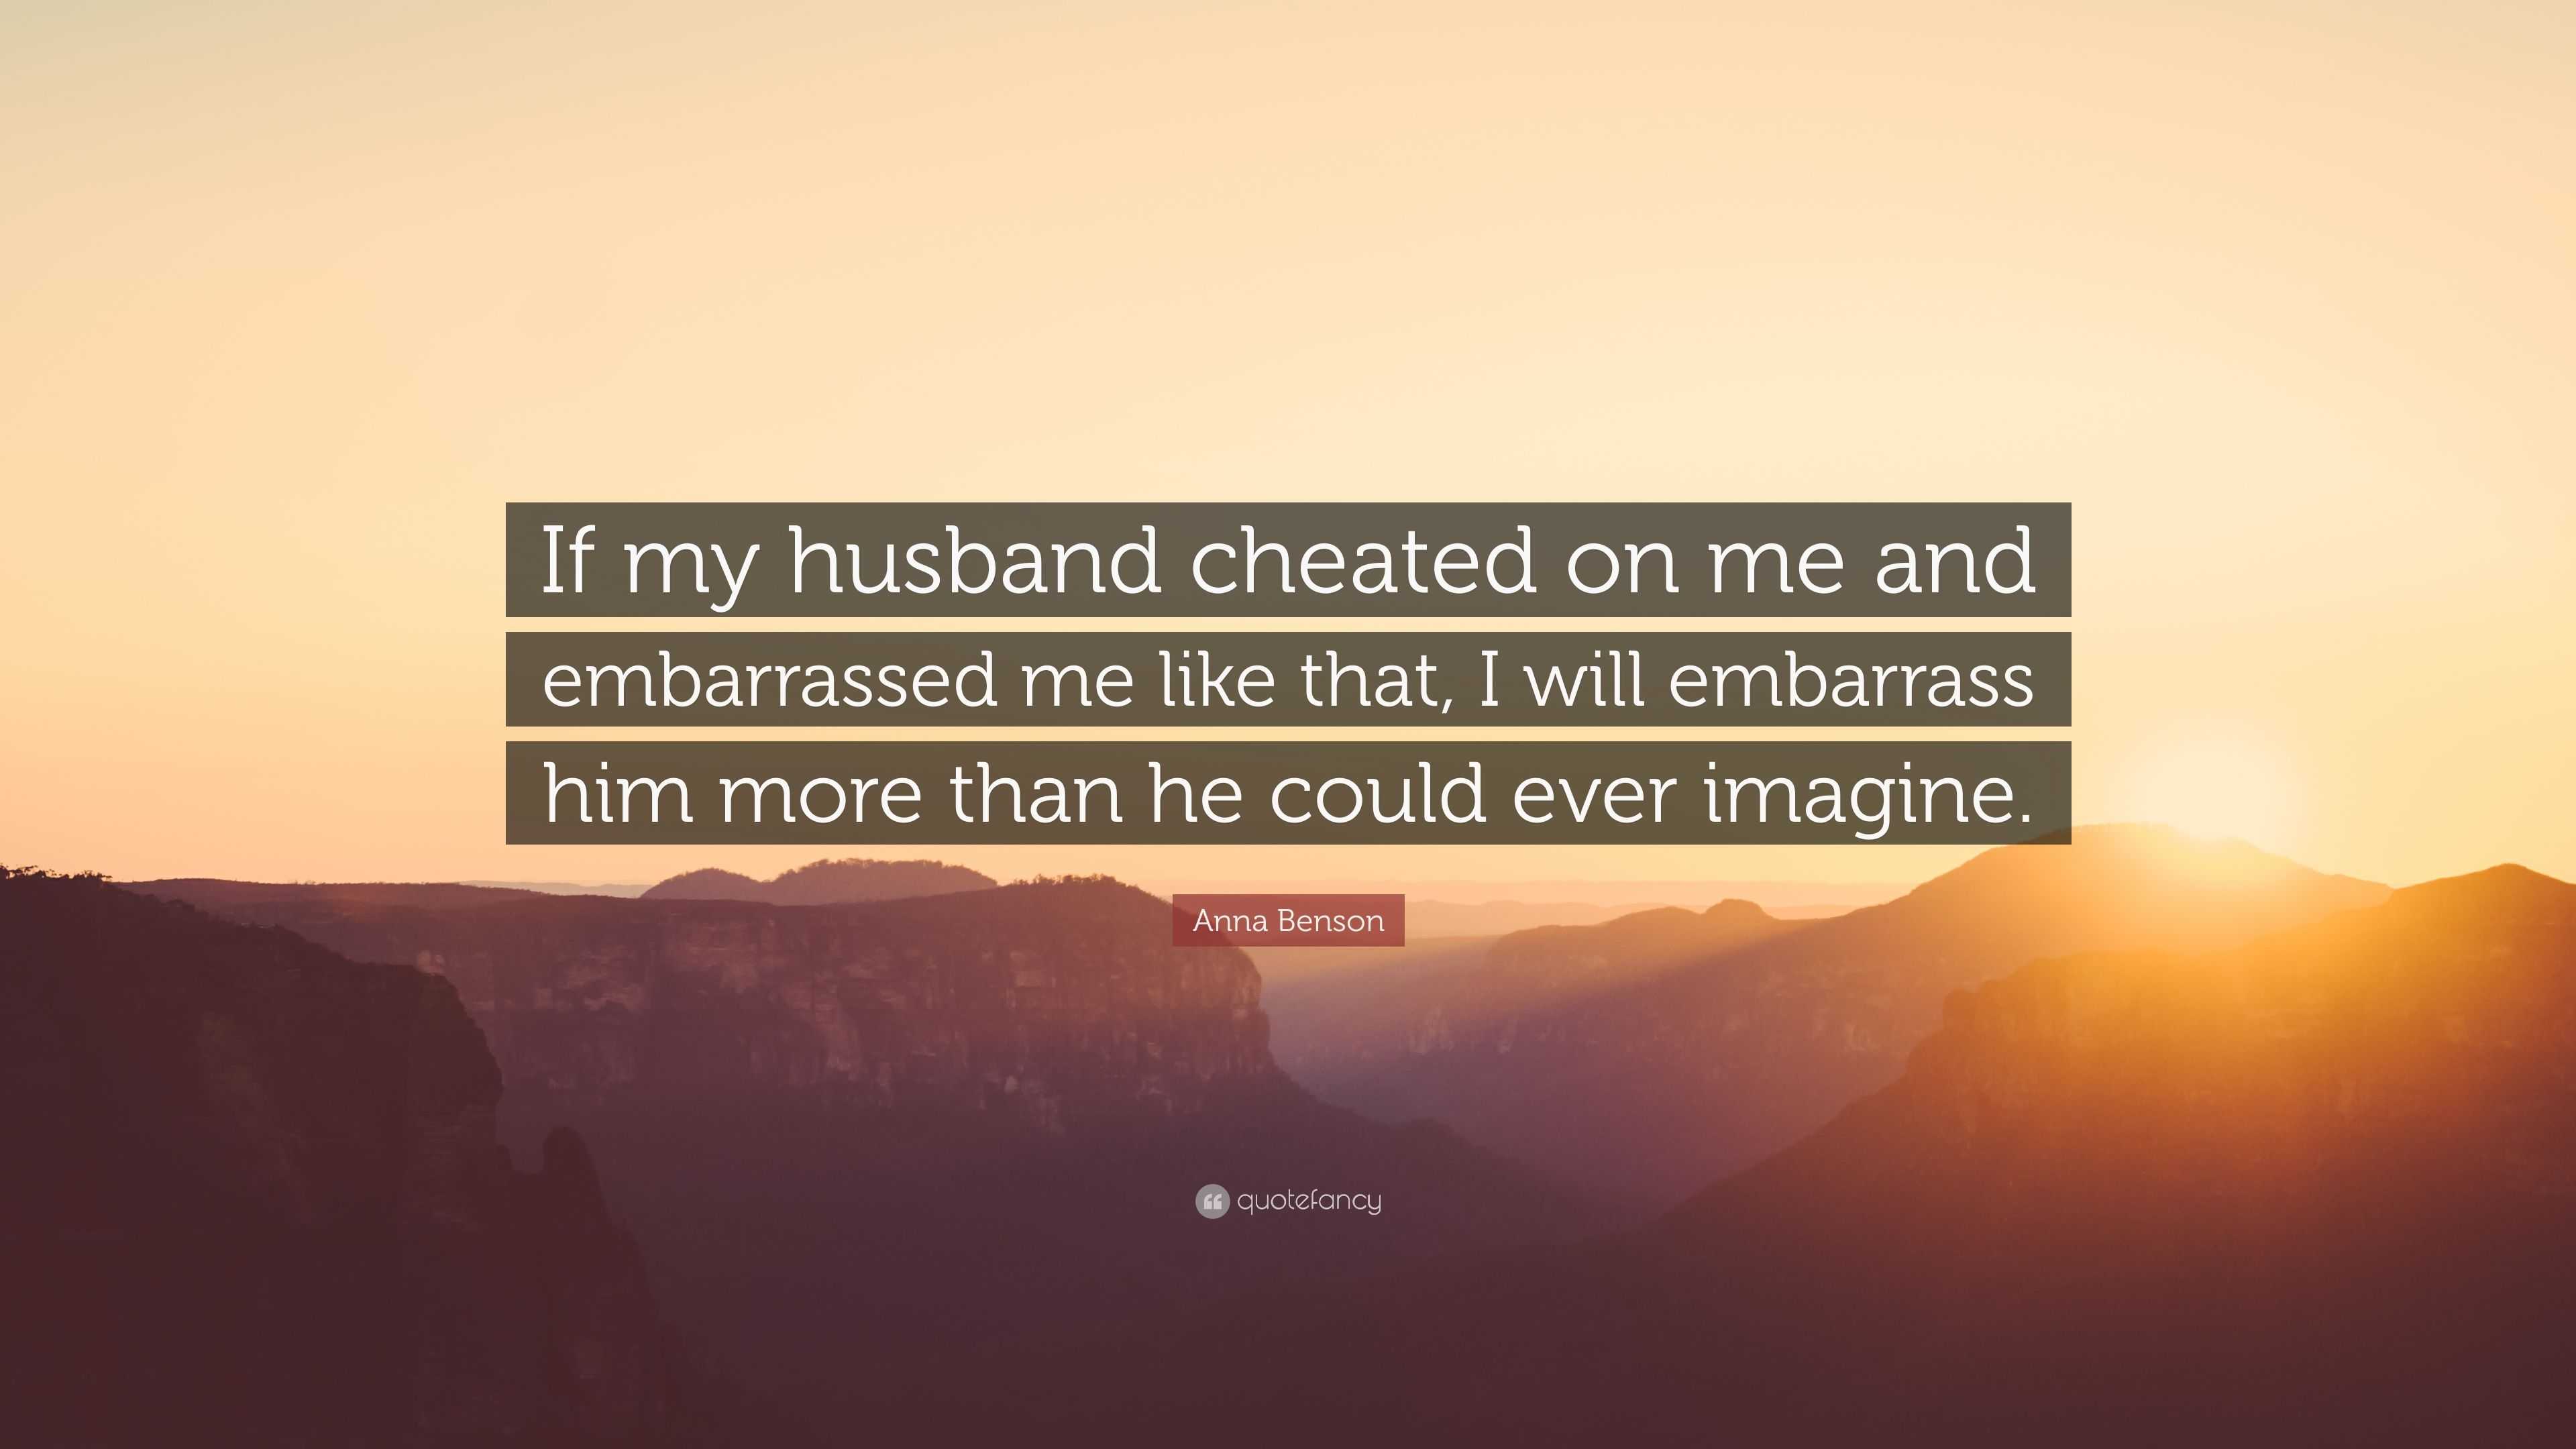 Anna Benson Quote “if My Husband Cheated On Me And Embarrassed Me Like That I Will Embarrass